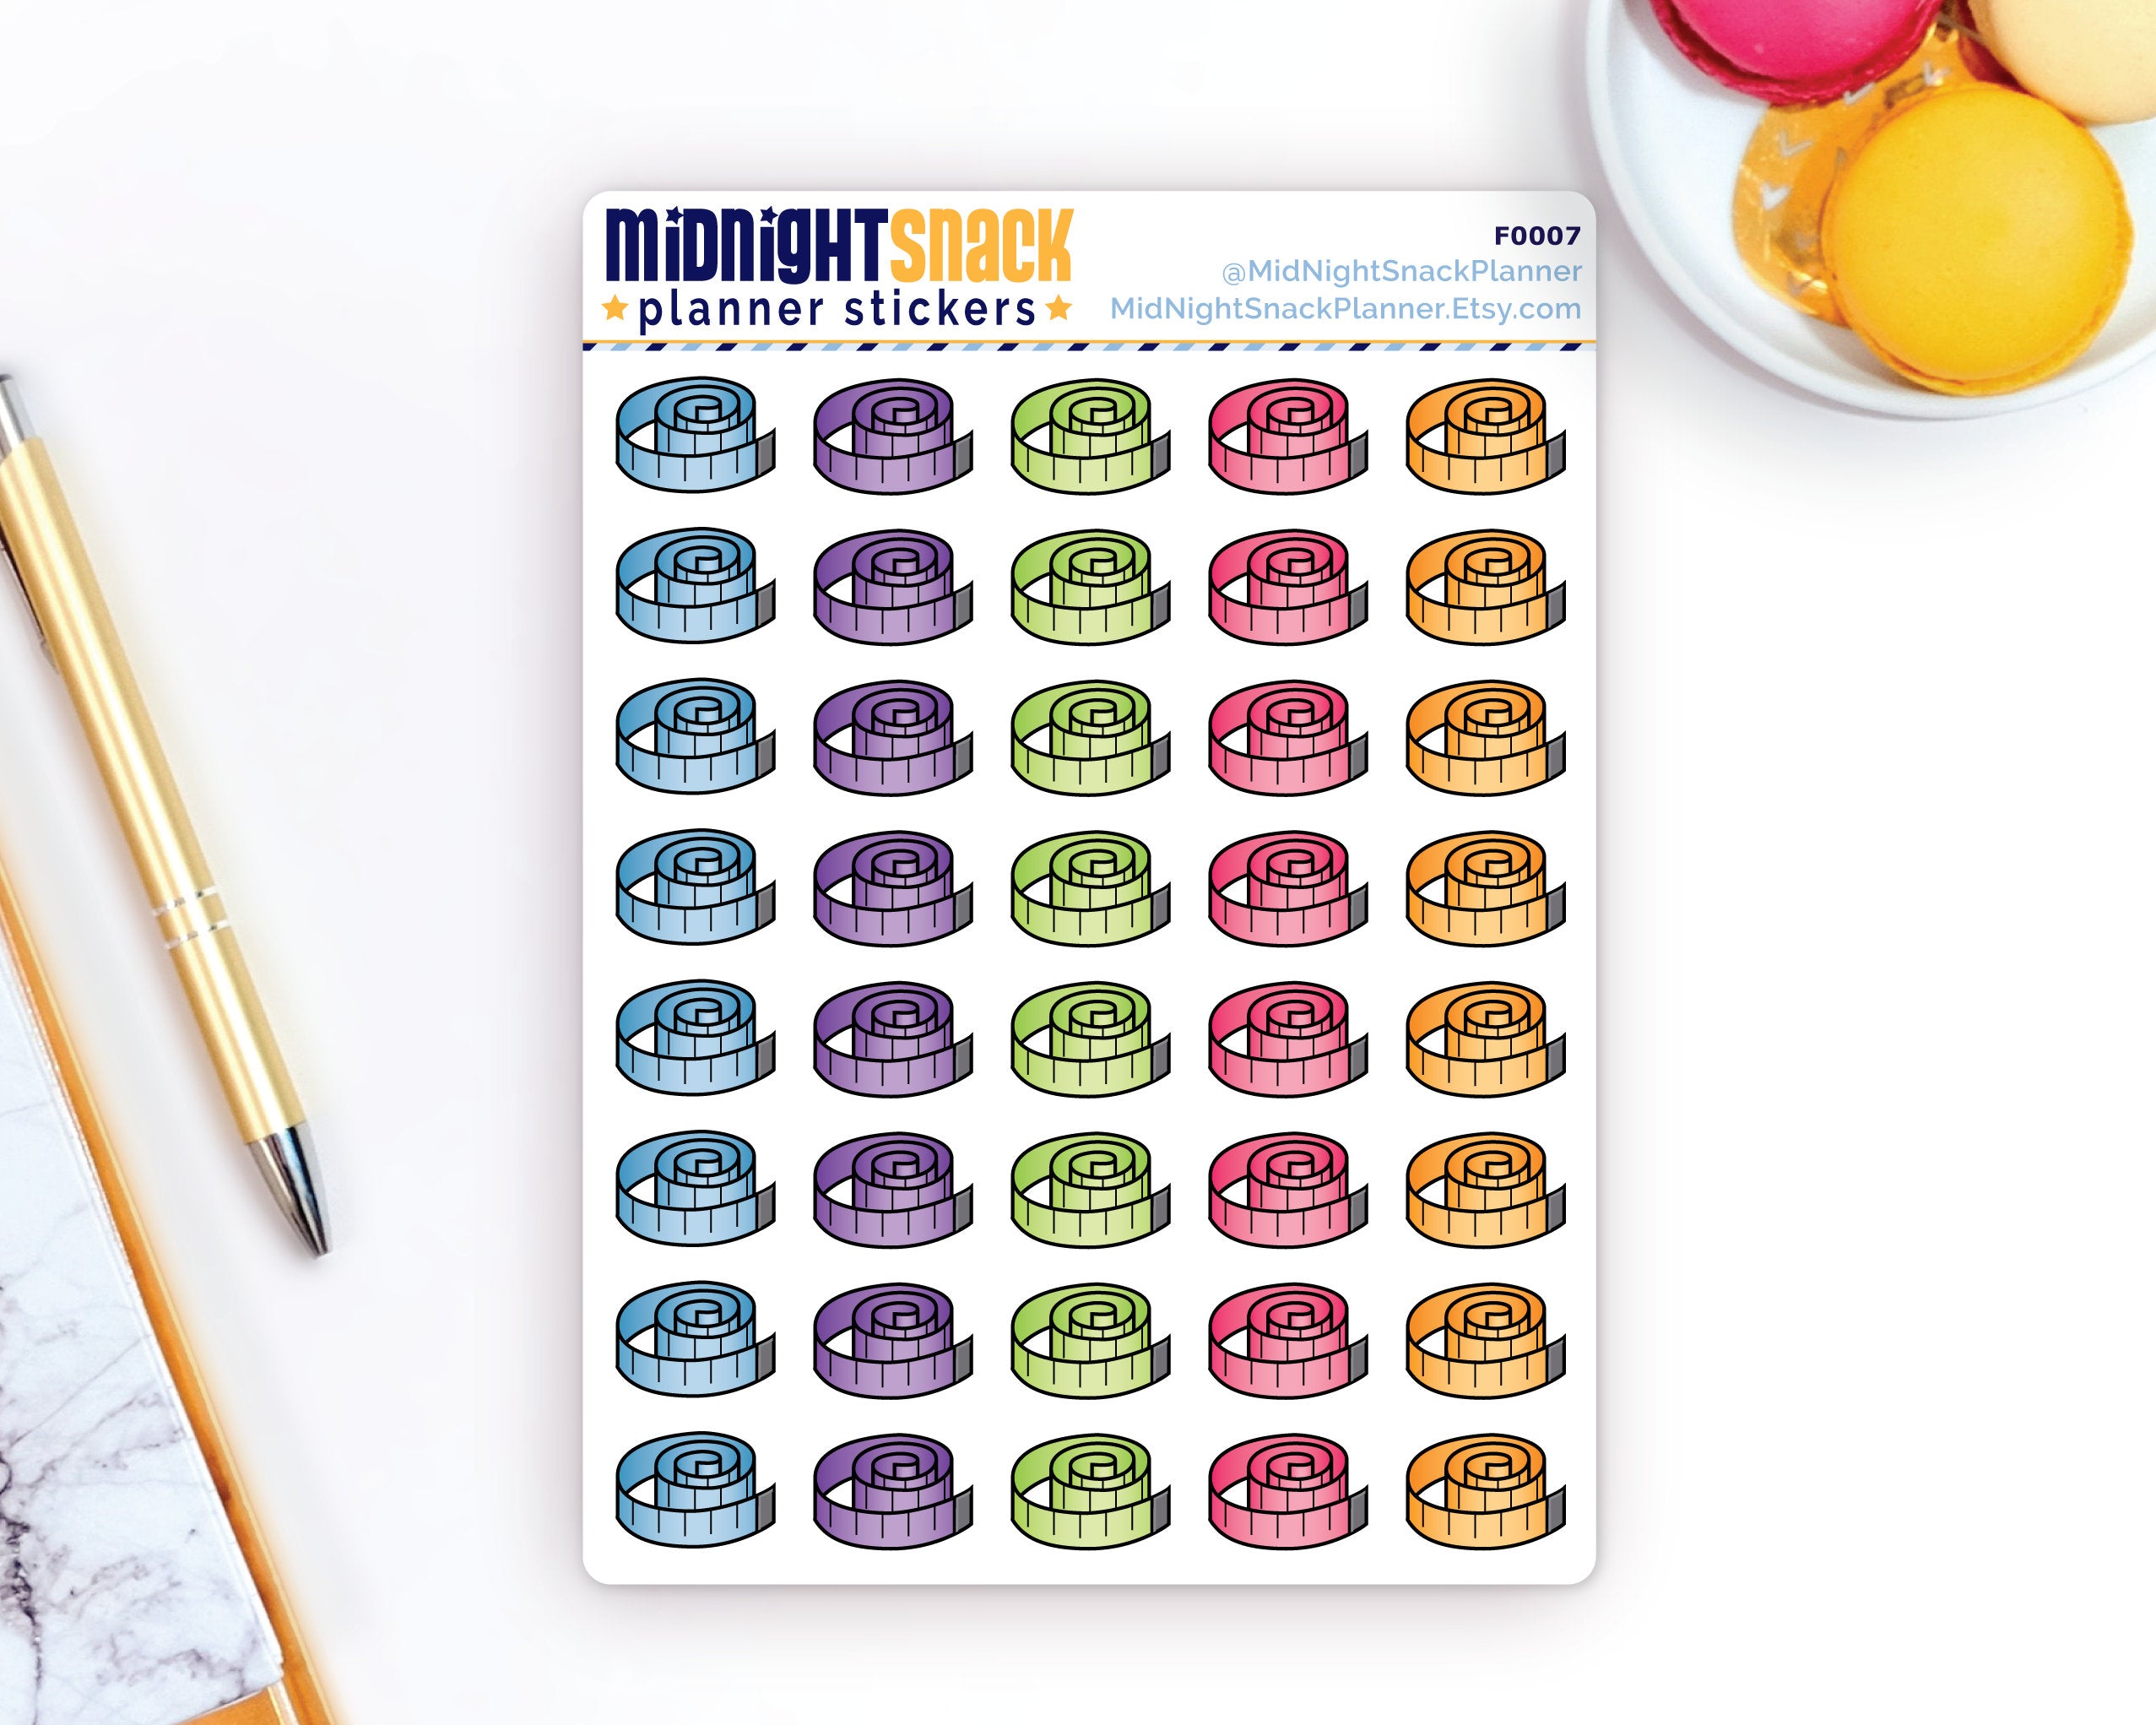 Measuring Tape Icon: Weight Loss and Fitness Planner Stickers Midnight Snack Planner